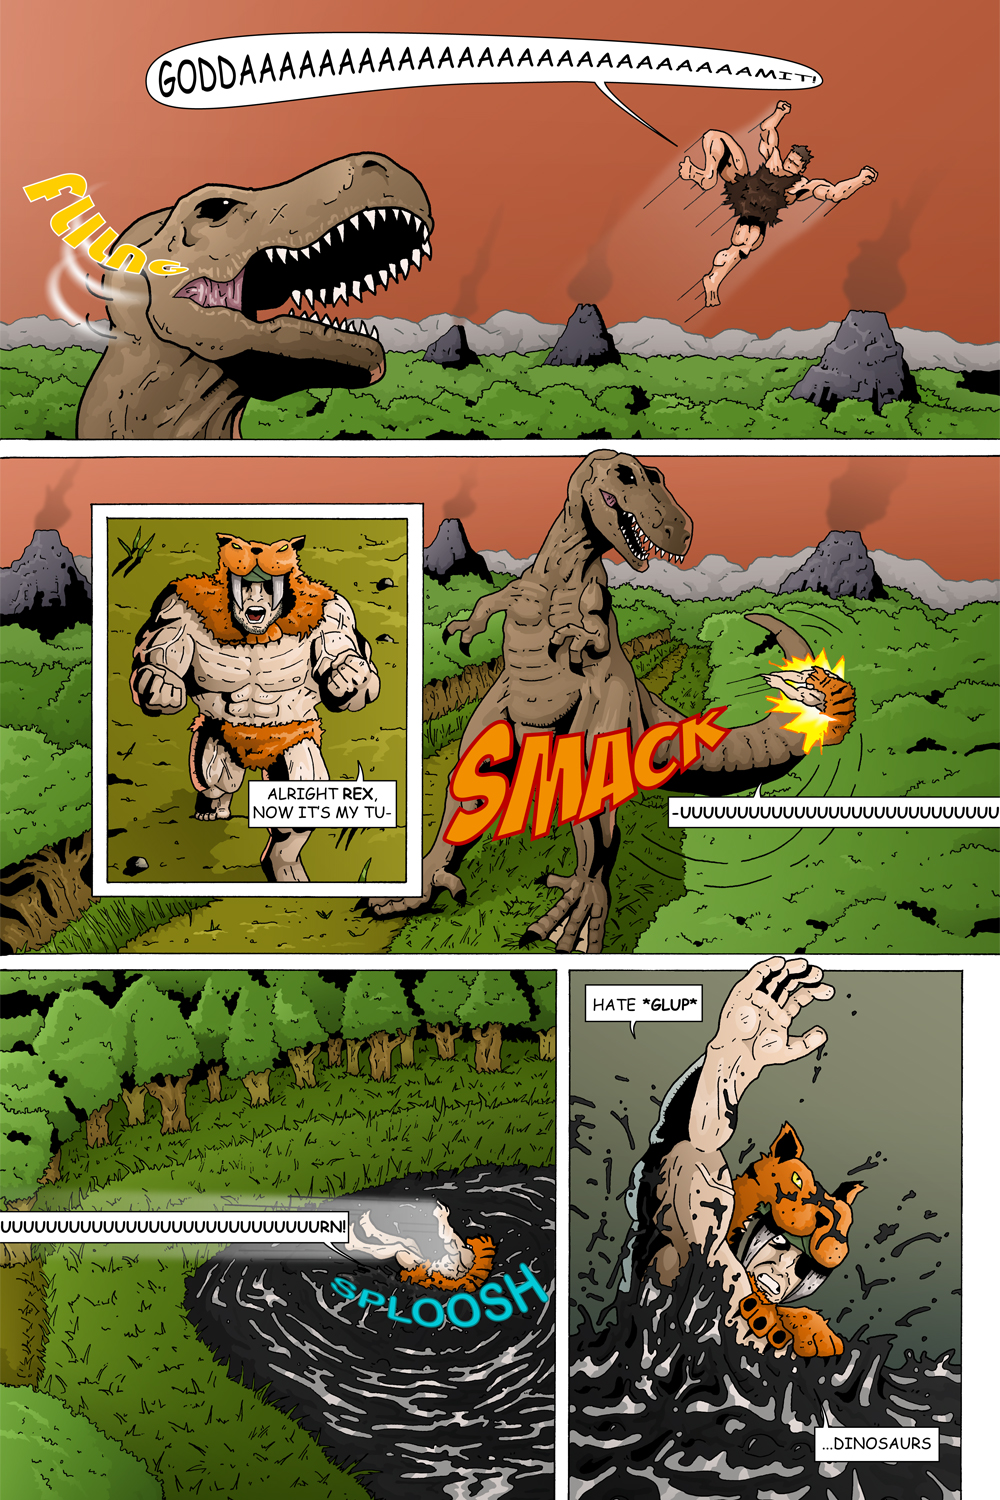 MISSION 003: PAGE 17 “ALRIGHT REX”